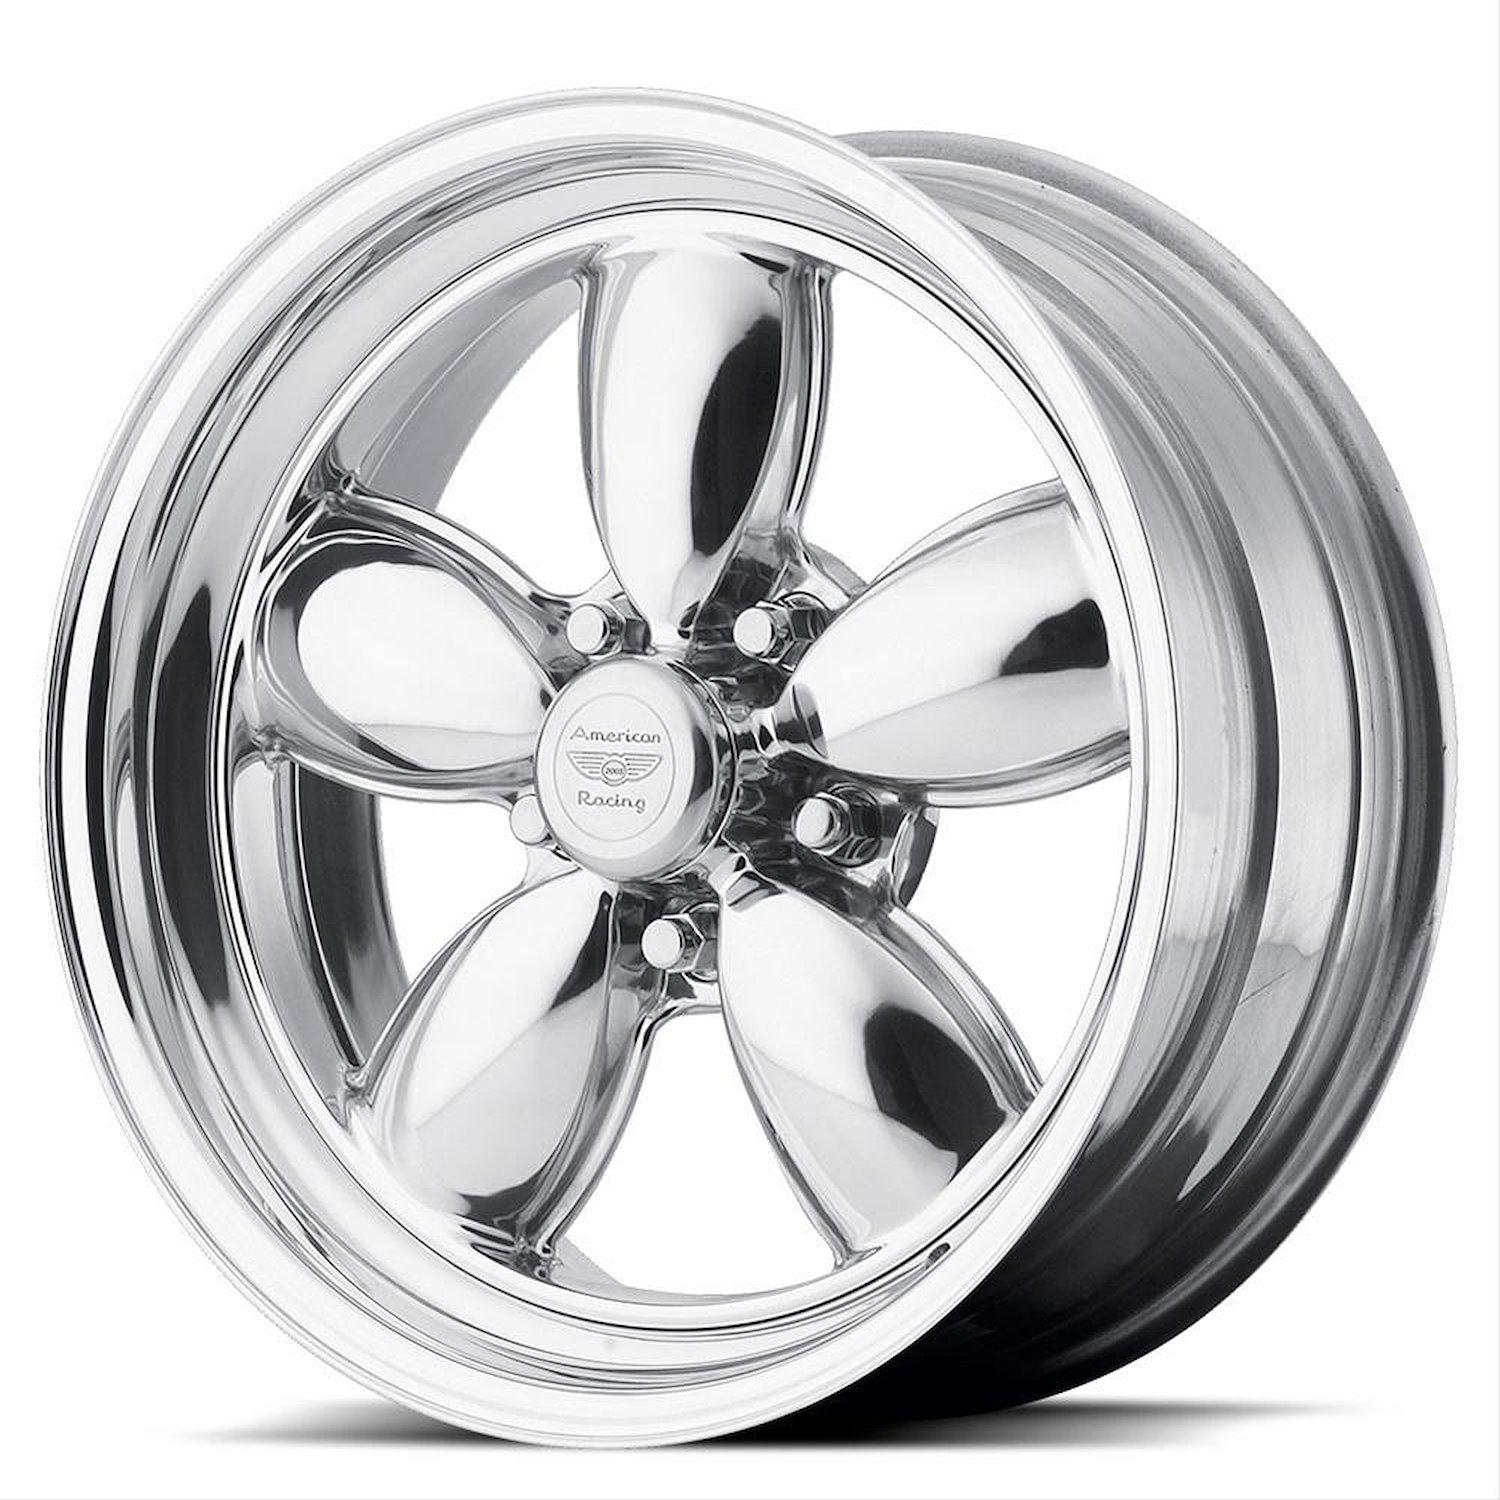 AMERICAN RACING CLASSIC 200S TWO-PIECE POLISHED 15 x 10 5x4.5 0 5.50